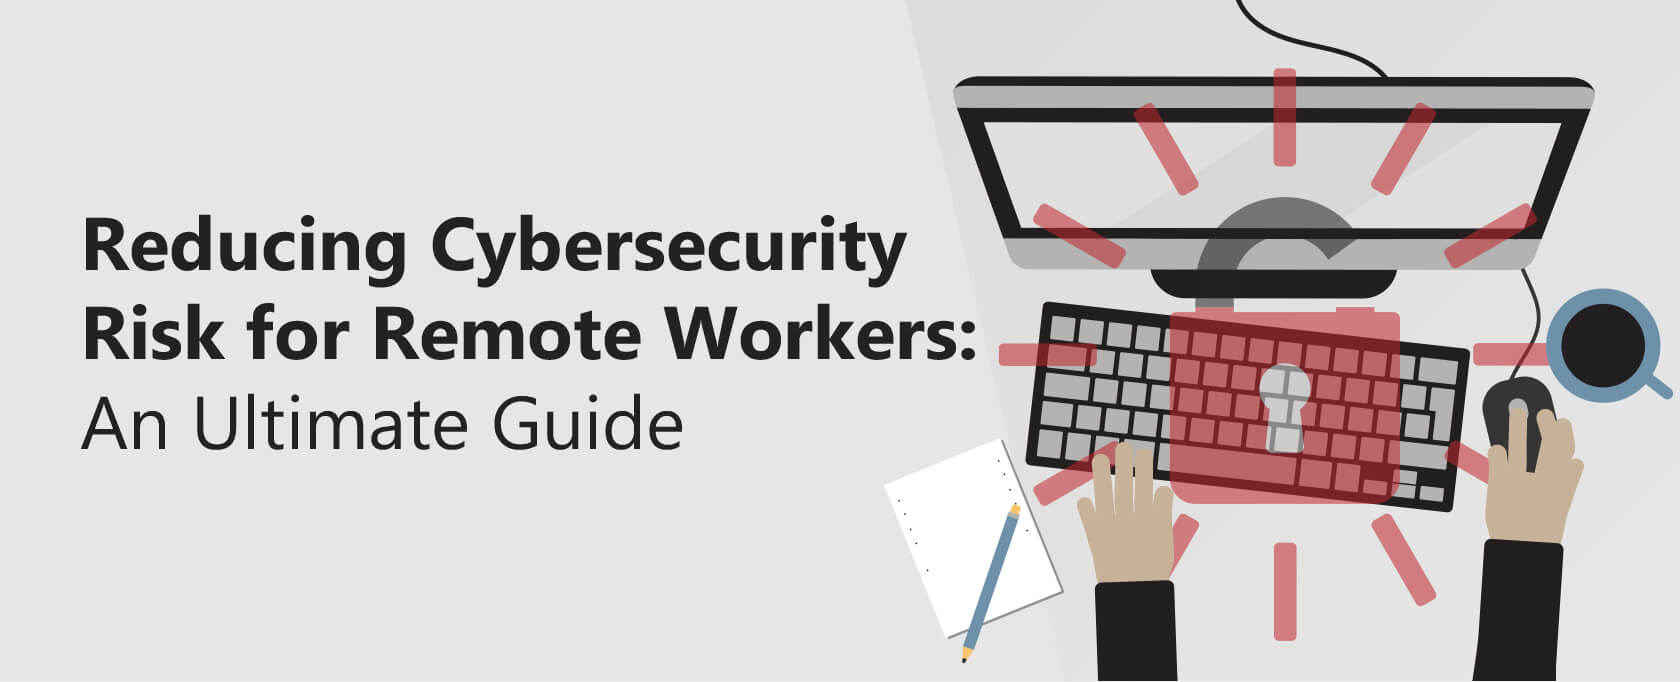 Reducing Cybersecurity Risk for Remote Workers: An Ultimate Guide